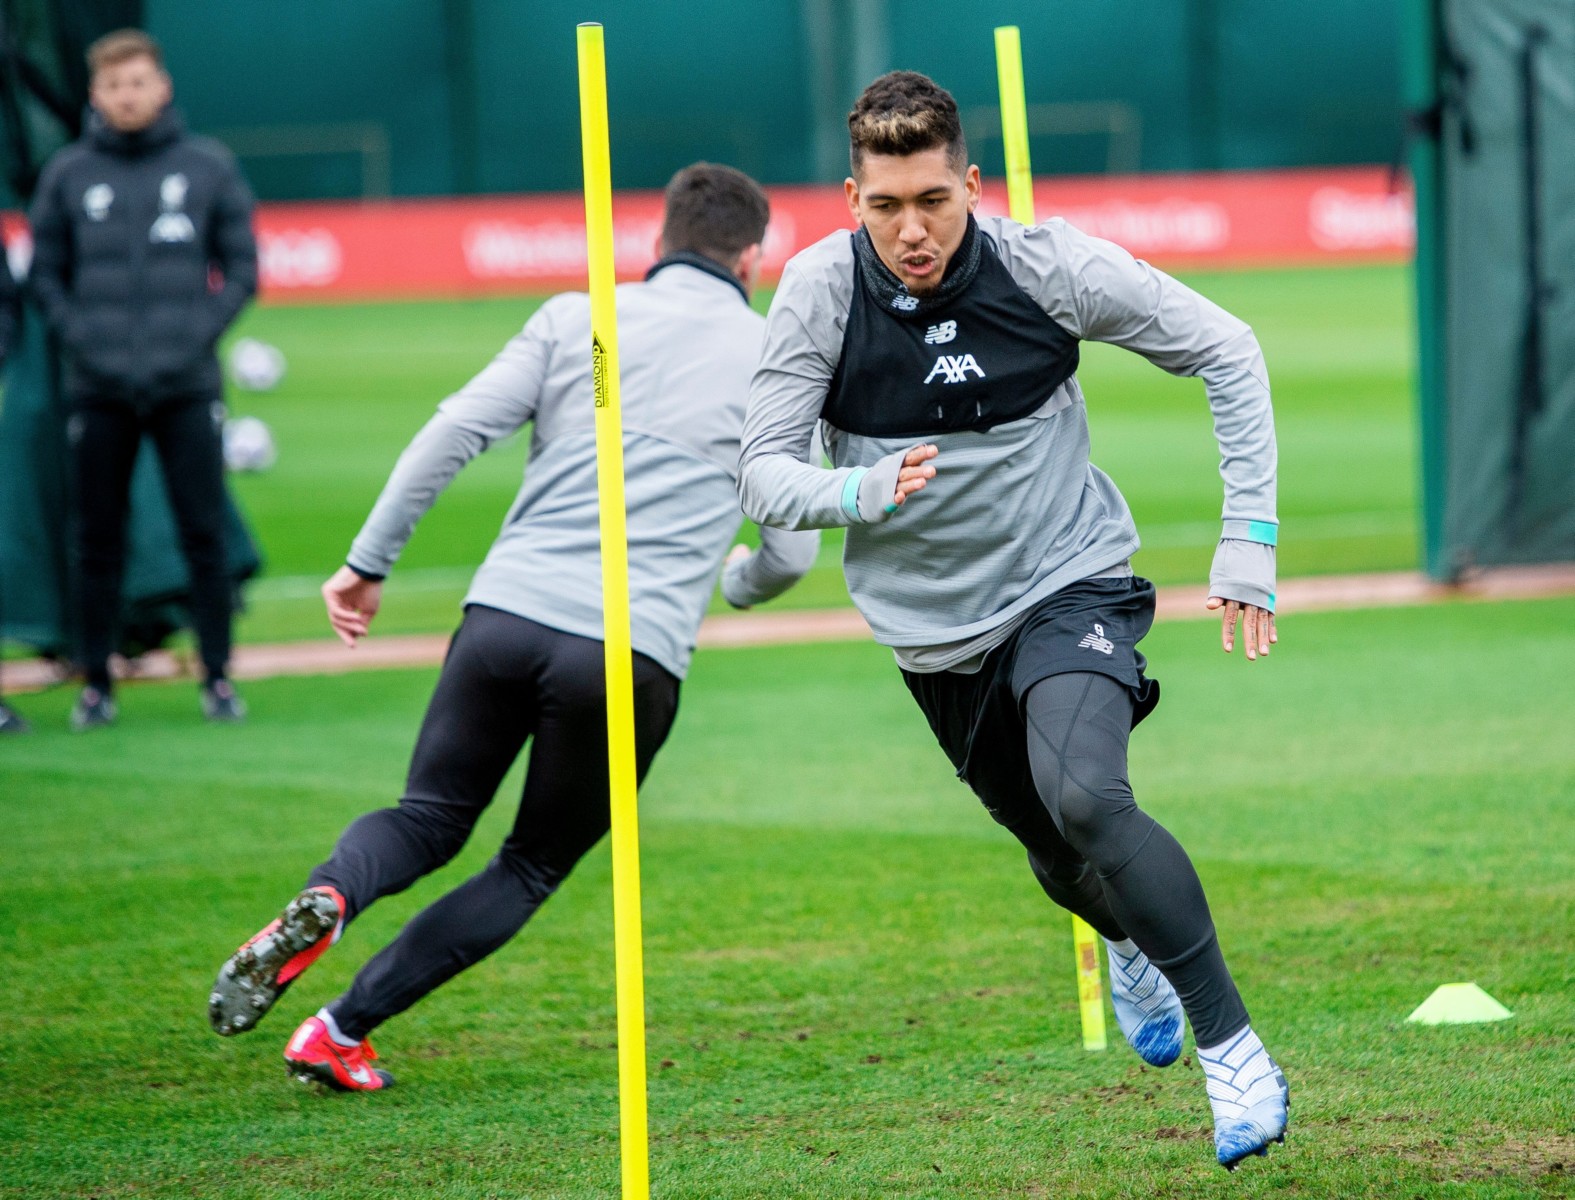 Brtazil frontman Roberto Firmino gets in gear for the Champions League last-16 return leg, which his Liverpool need to win